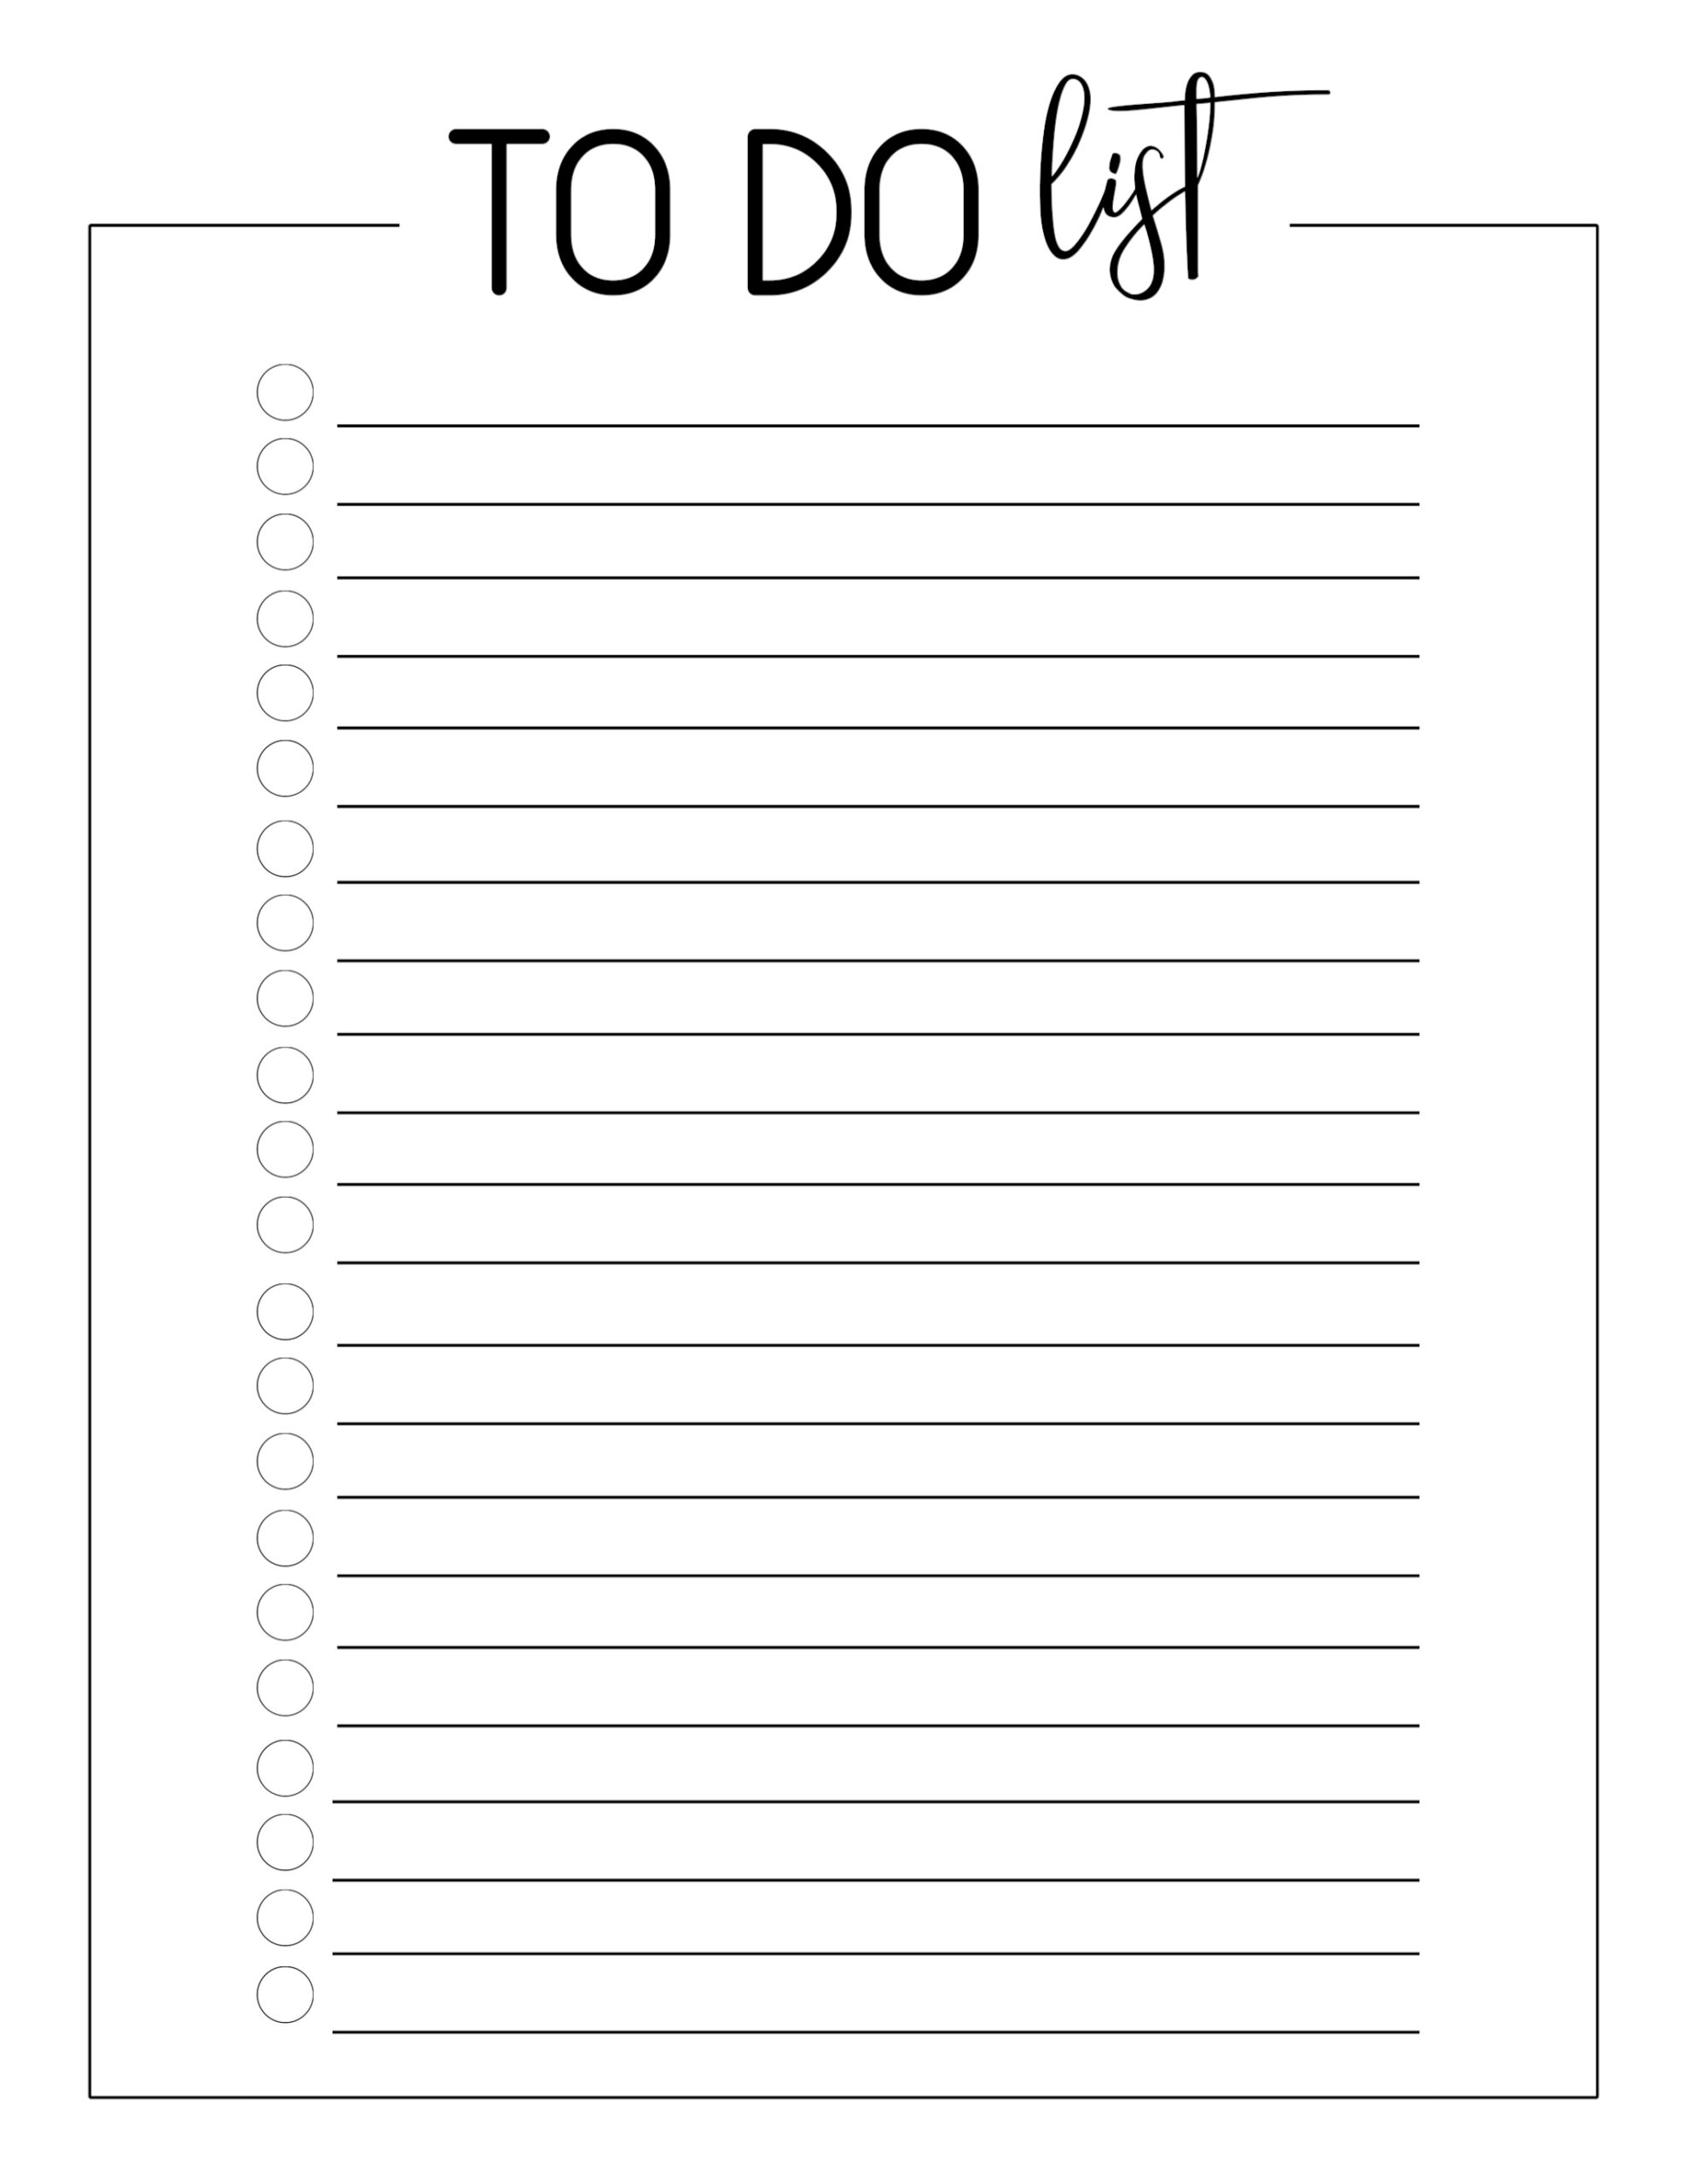 Free Printable To Do List/Planner